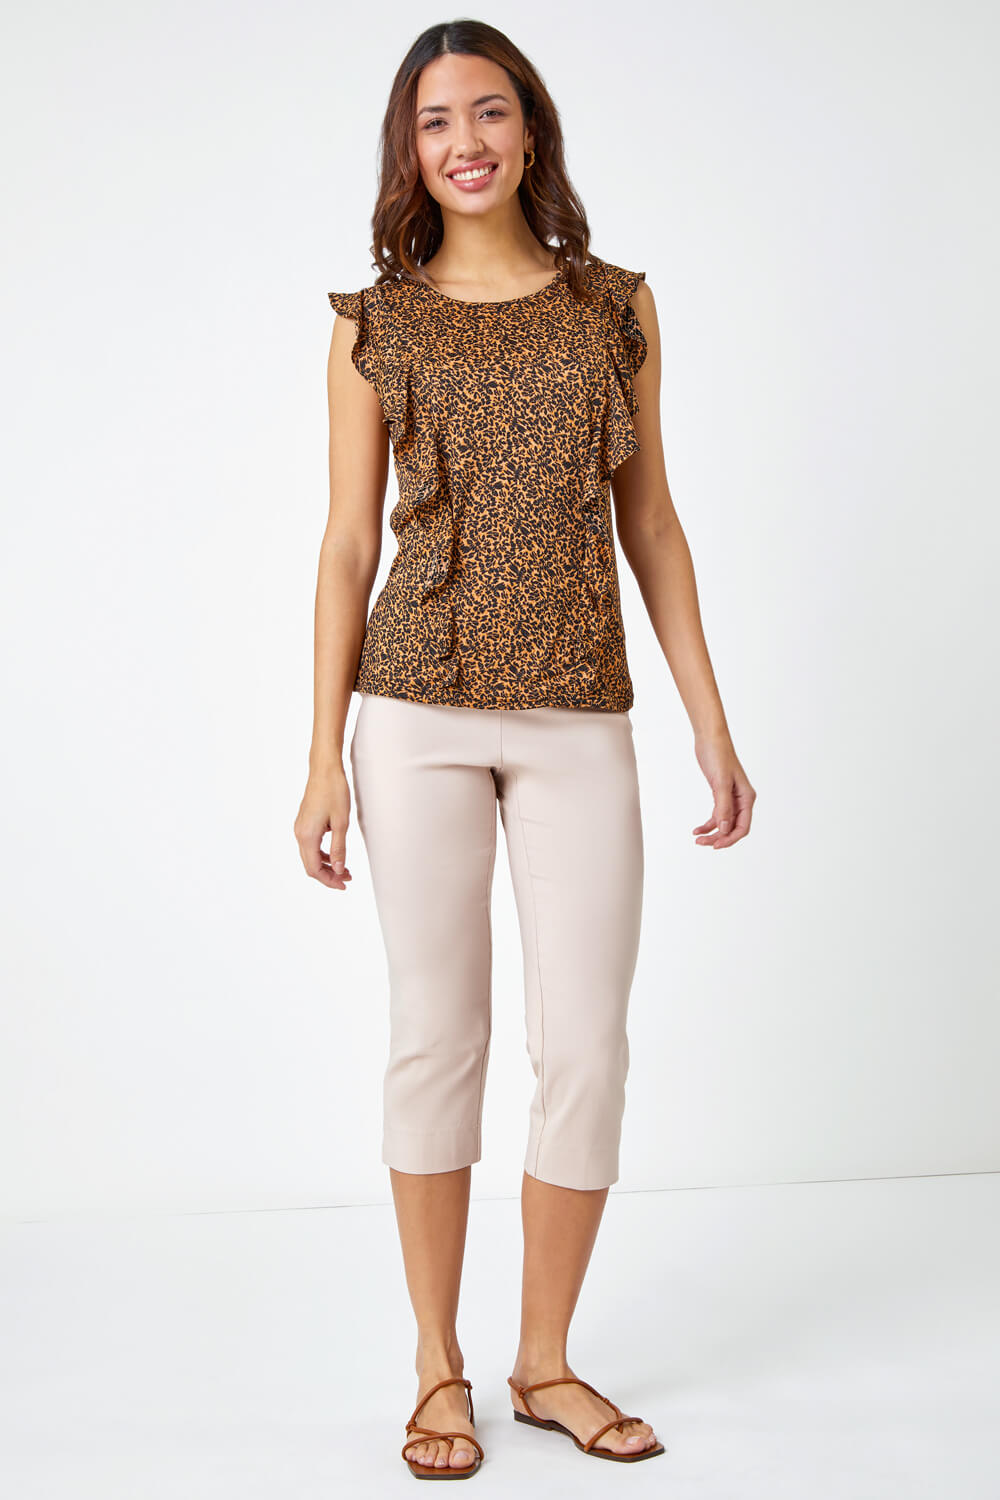 Brown Leopard Print Frill Detail Jersey Top, Image 2 of 5